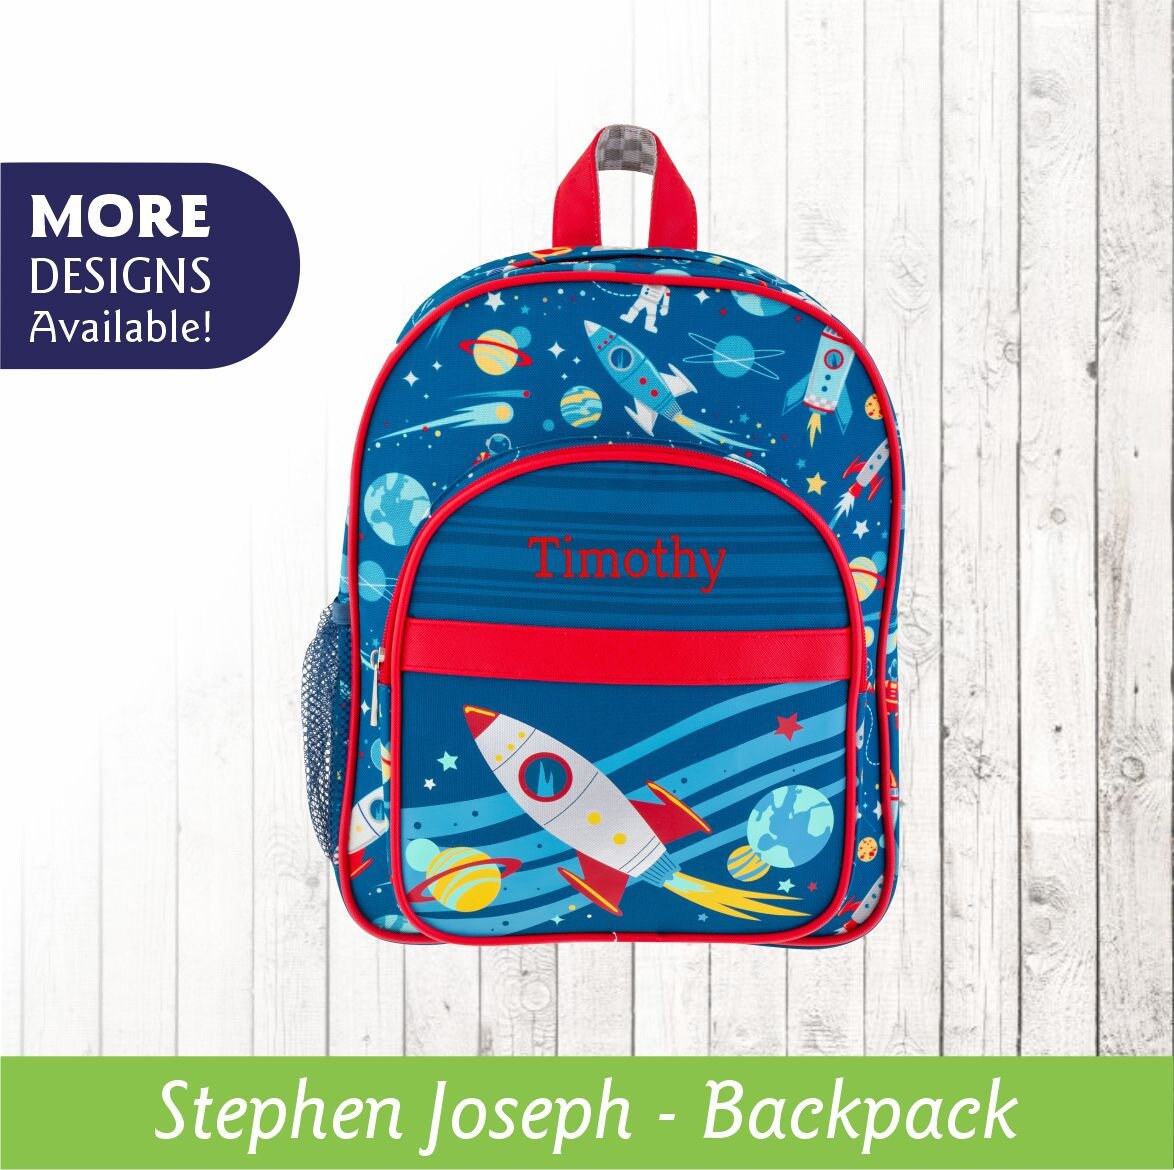 Toddler Backpack and Matching Insulated Lunch Box , Pre School Set